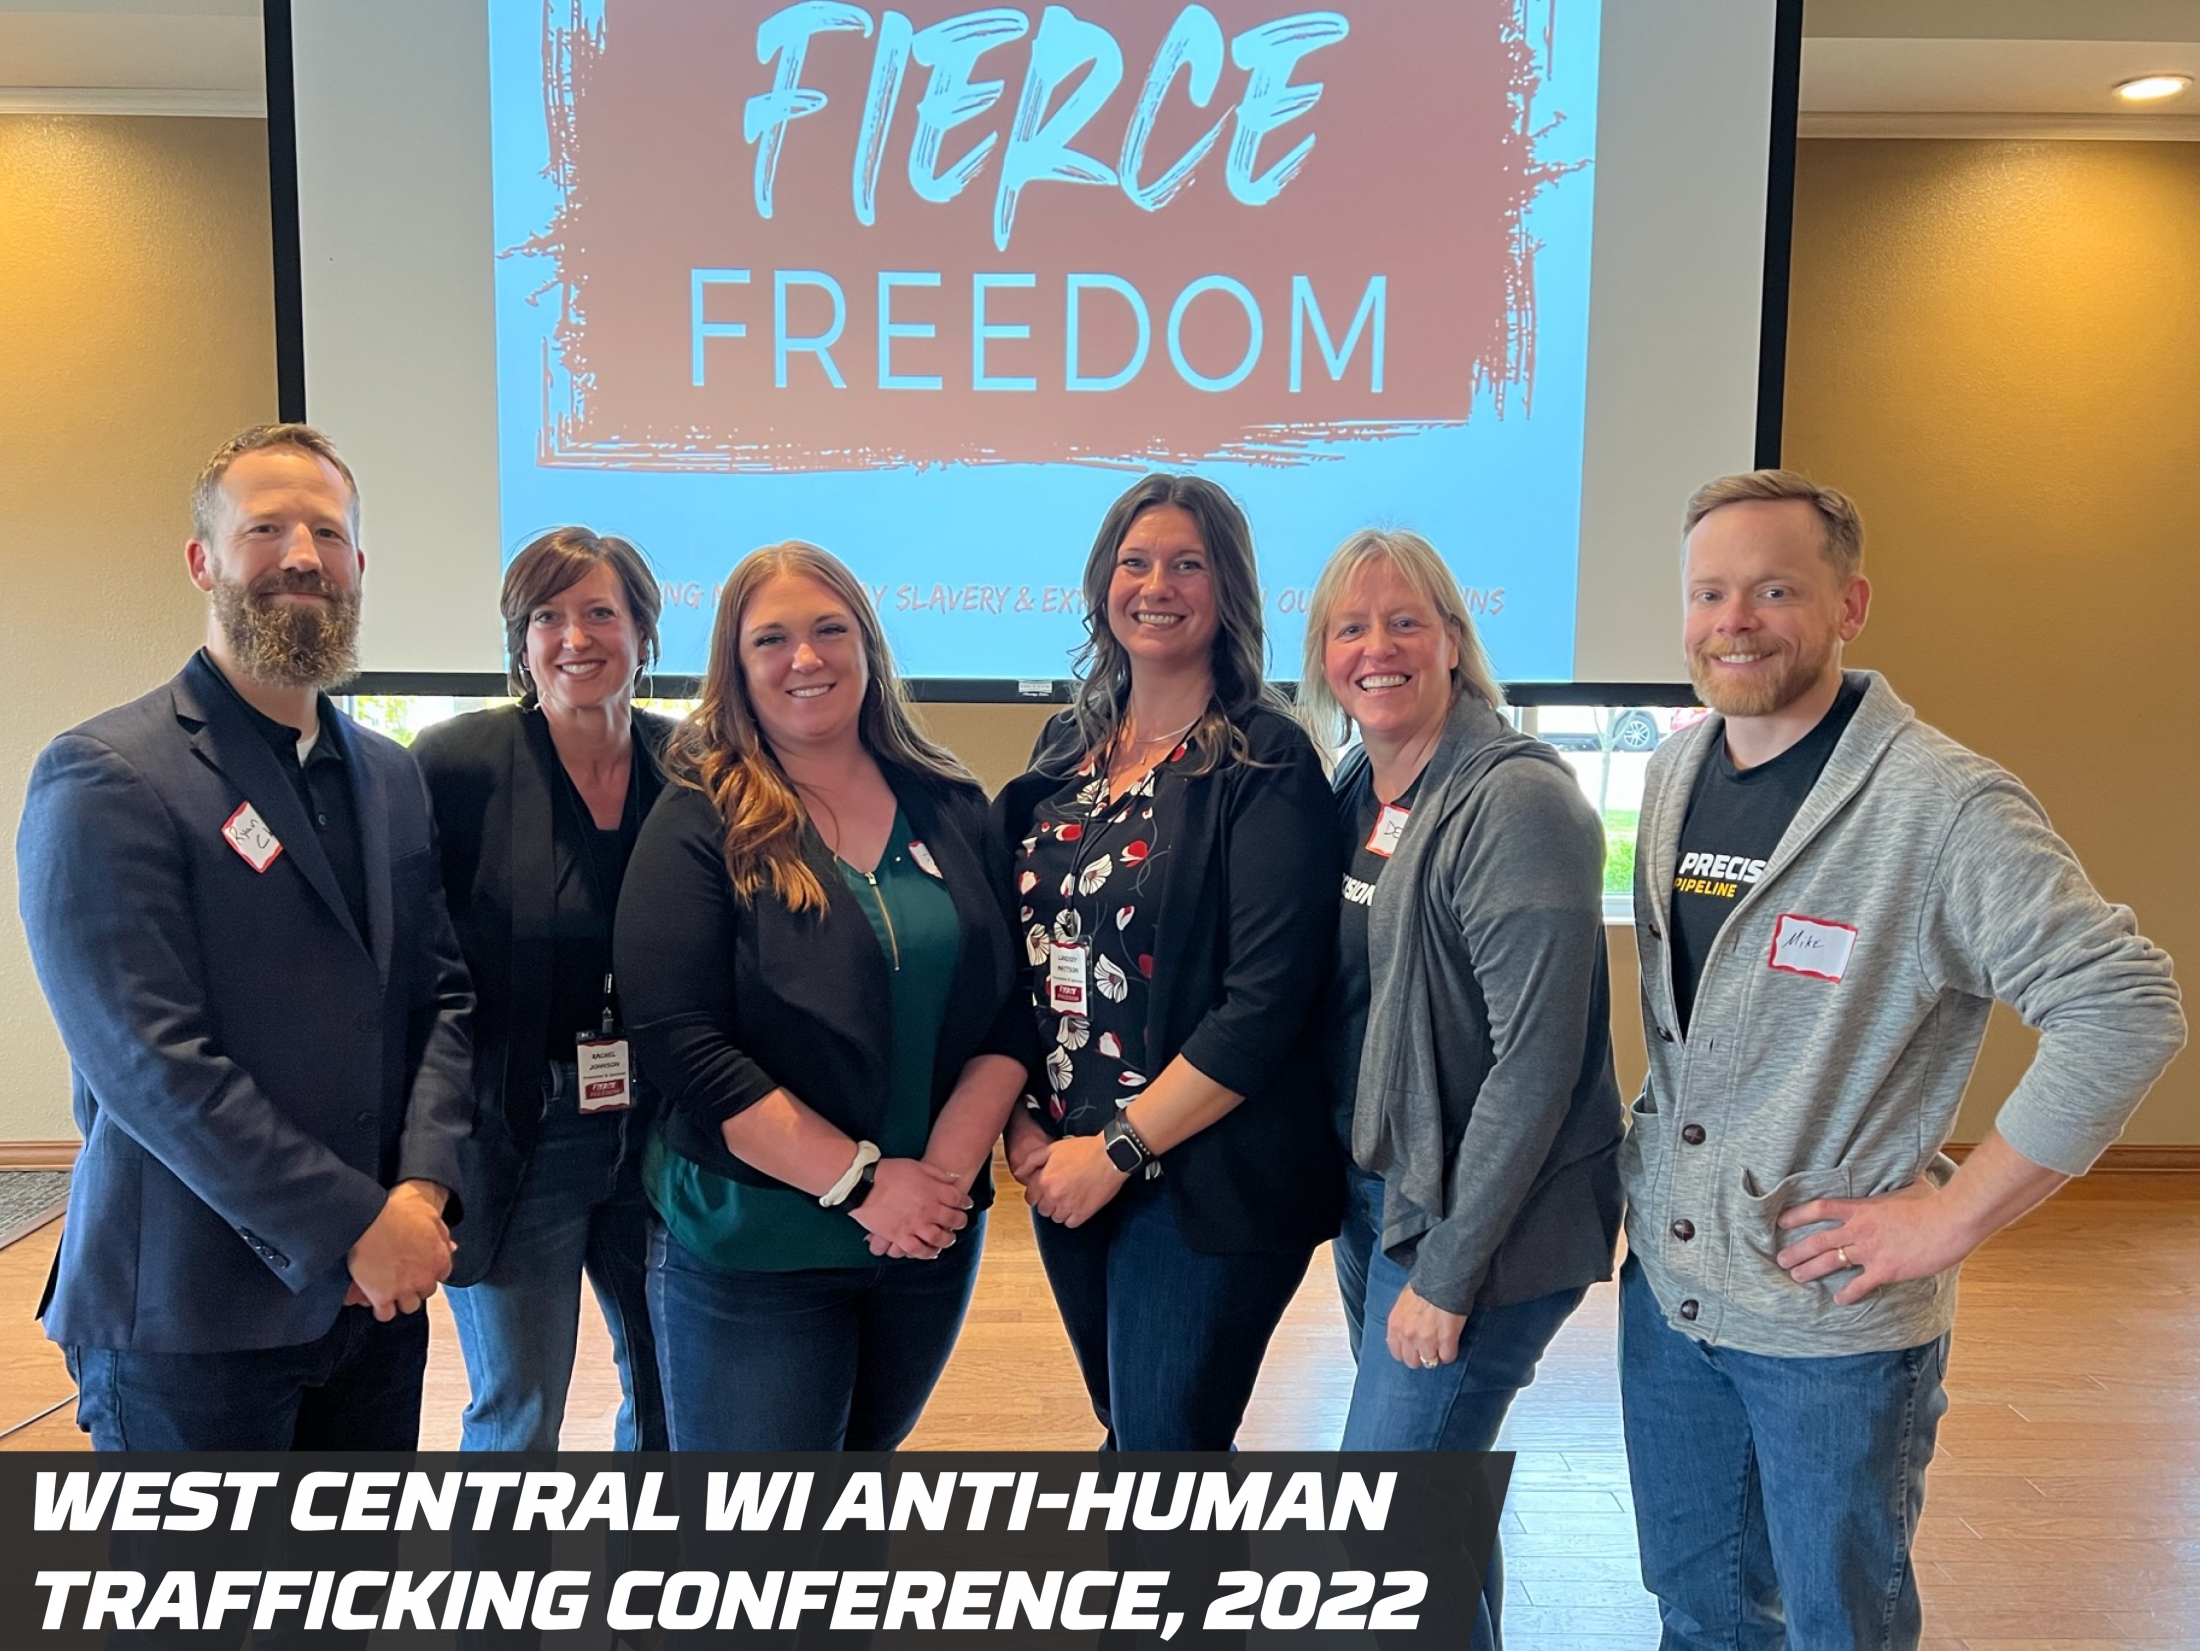 Precision Pipeline Human Trafficking Awareness Program: Presents at Fierce Freedom's West Central Wi